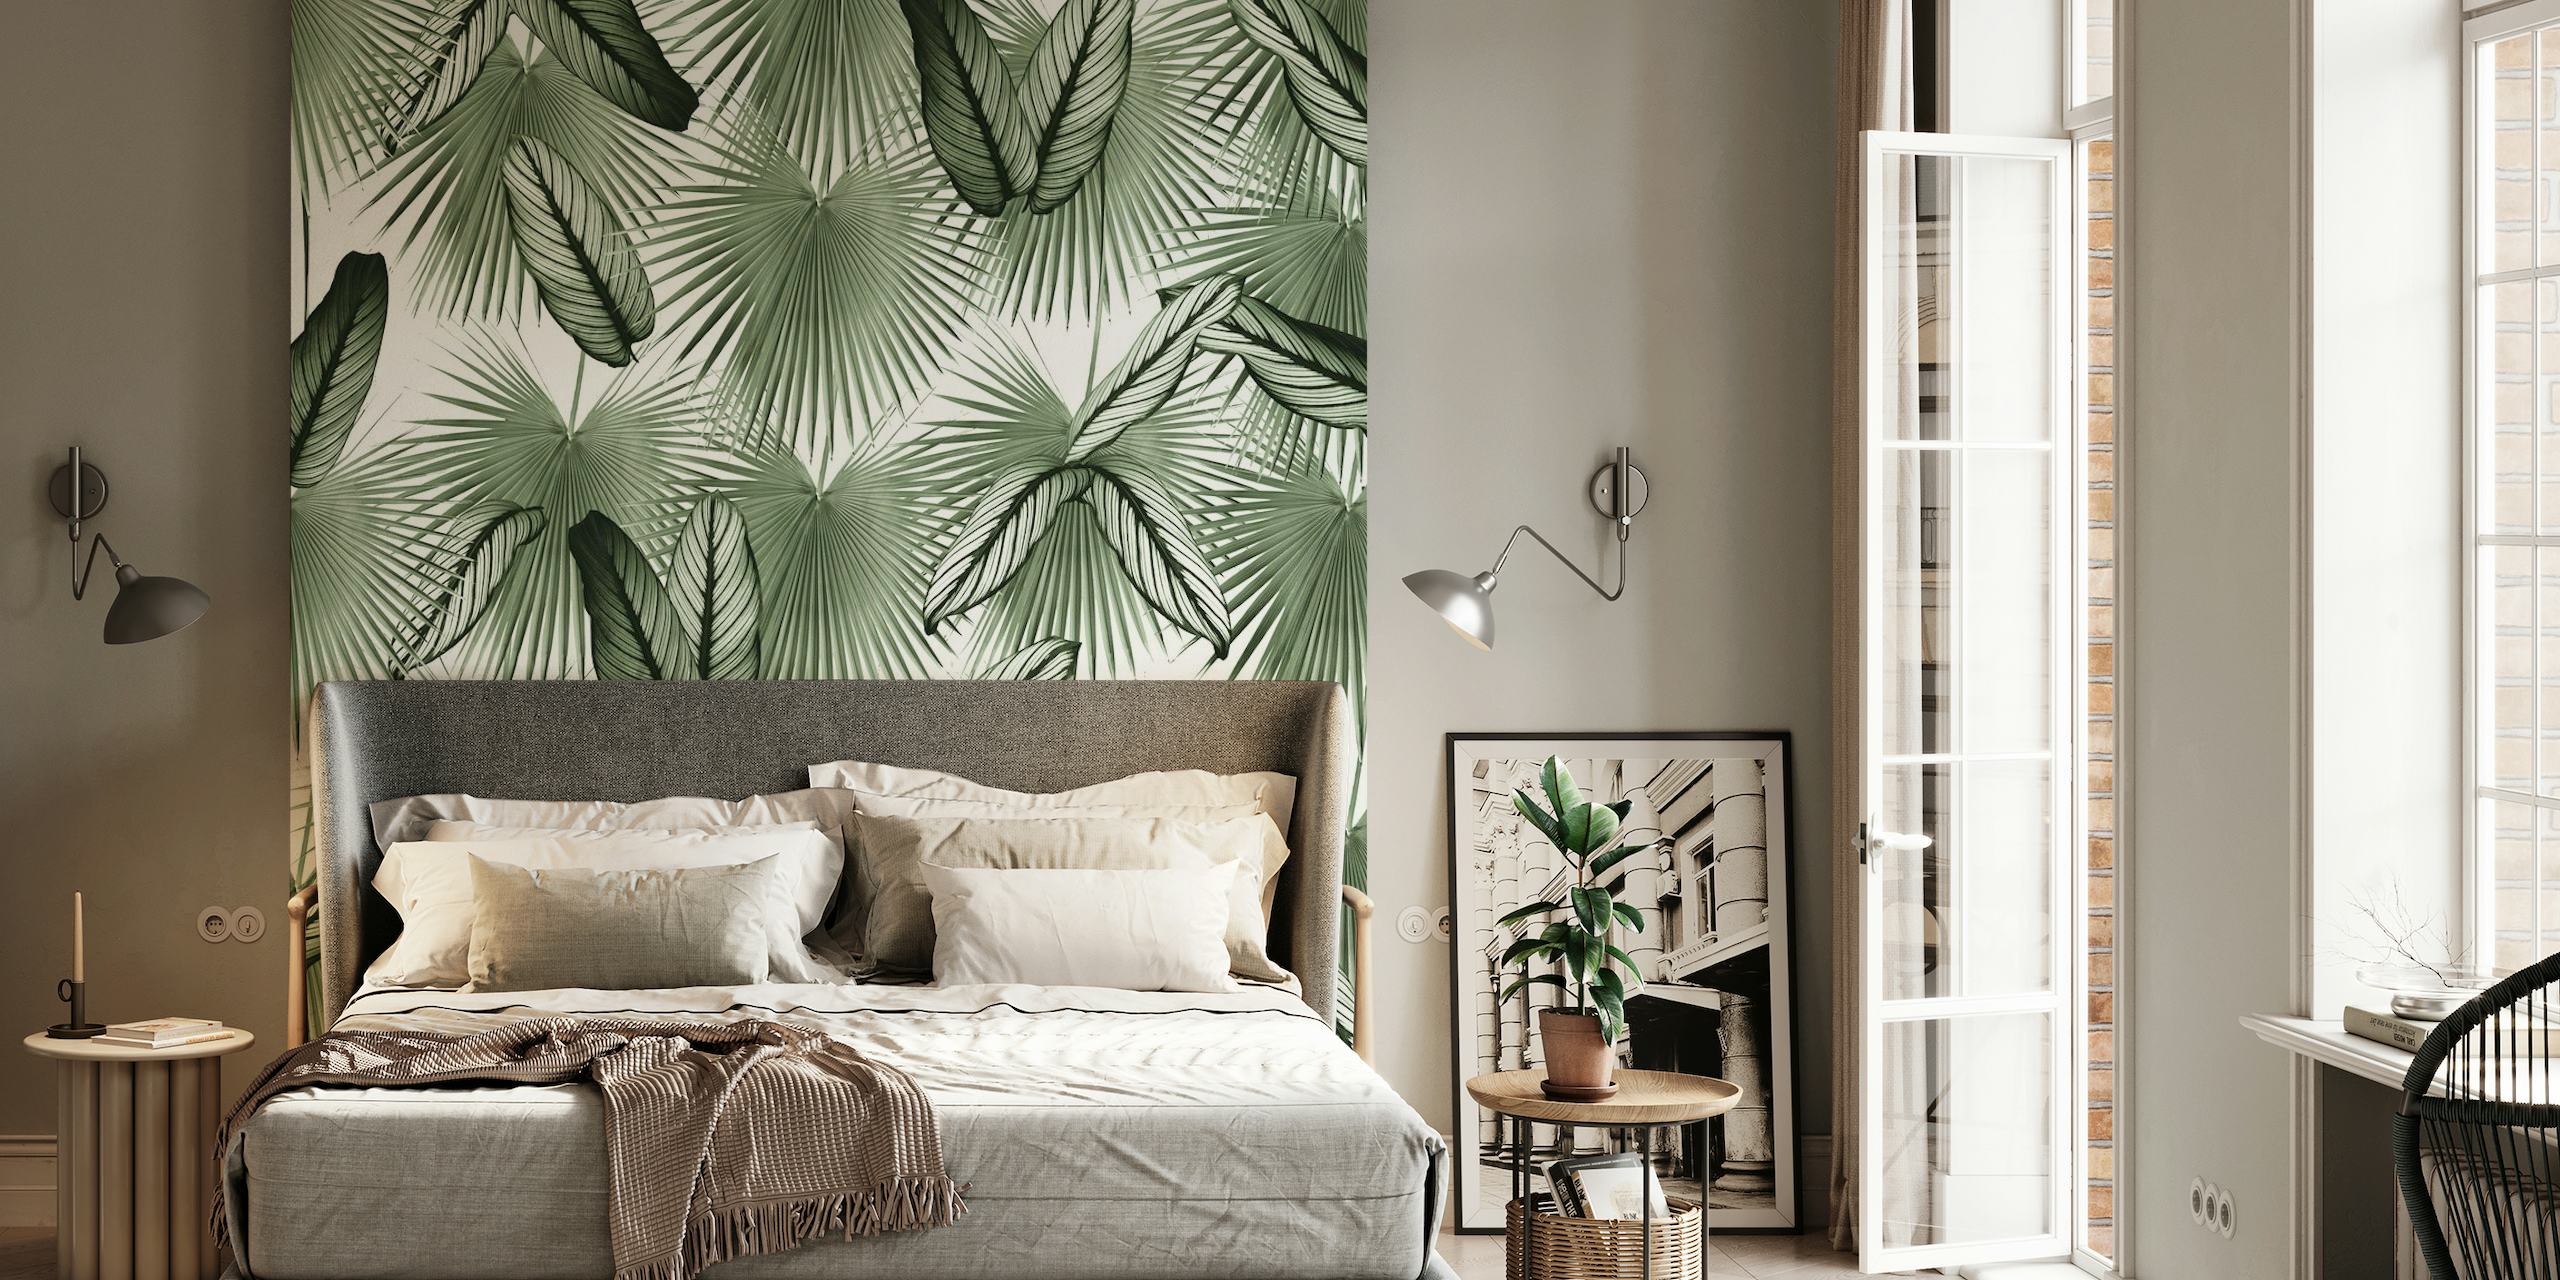 Calathea Fan Palm Leaves wall mural showing detailed tropical foliage in monochrome greens.